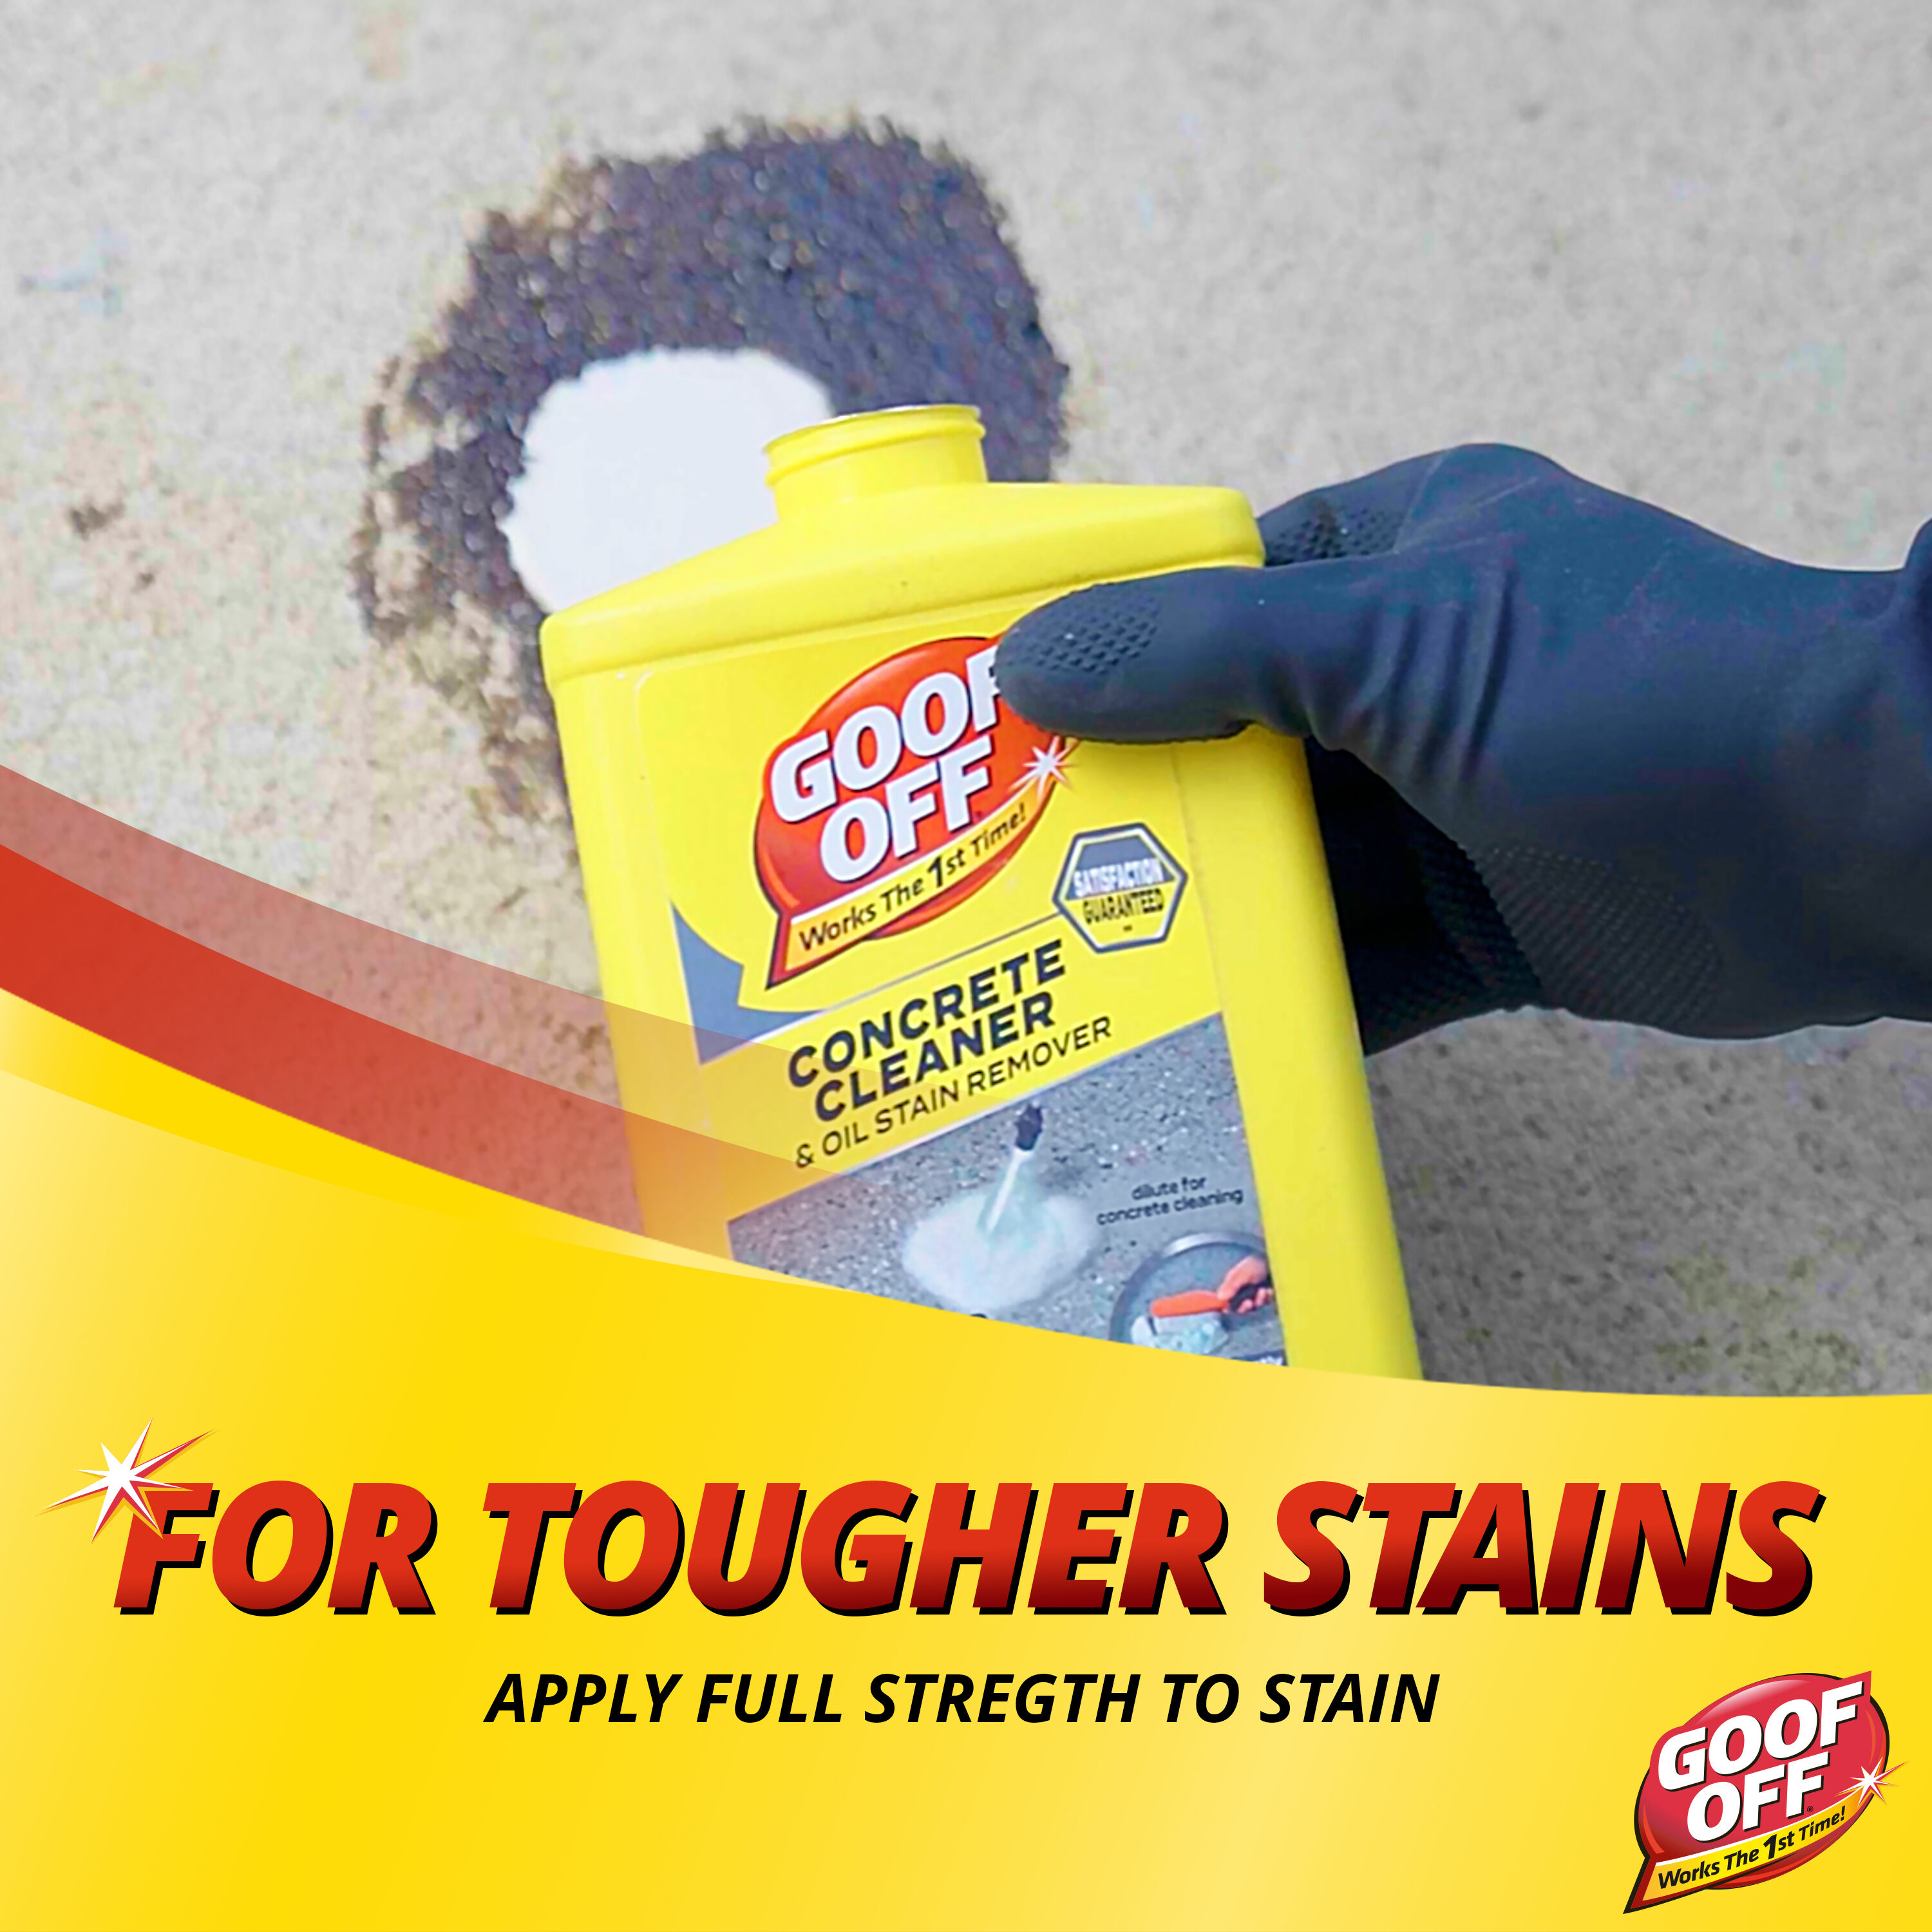 Goof Off 16 Oz. Pro Strength Dried Paint Remover - Town Hardware & General  Store